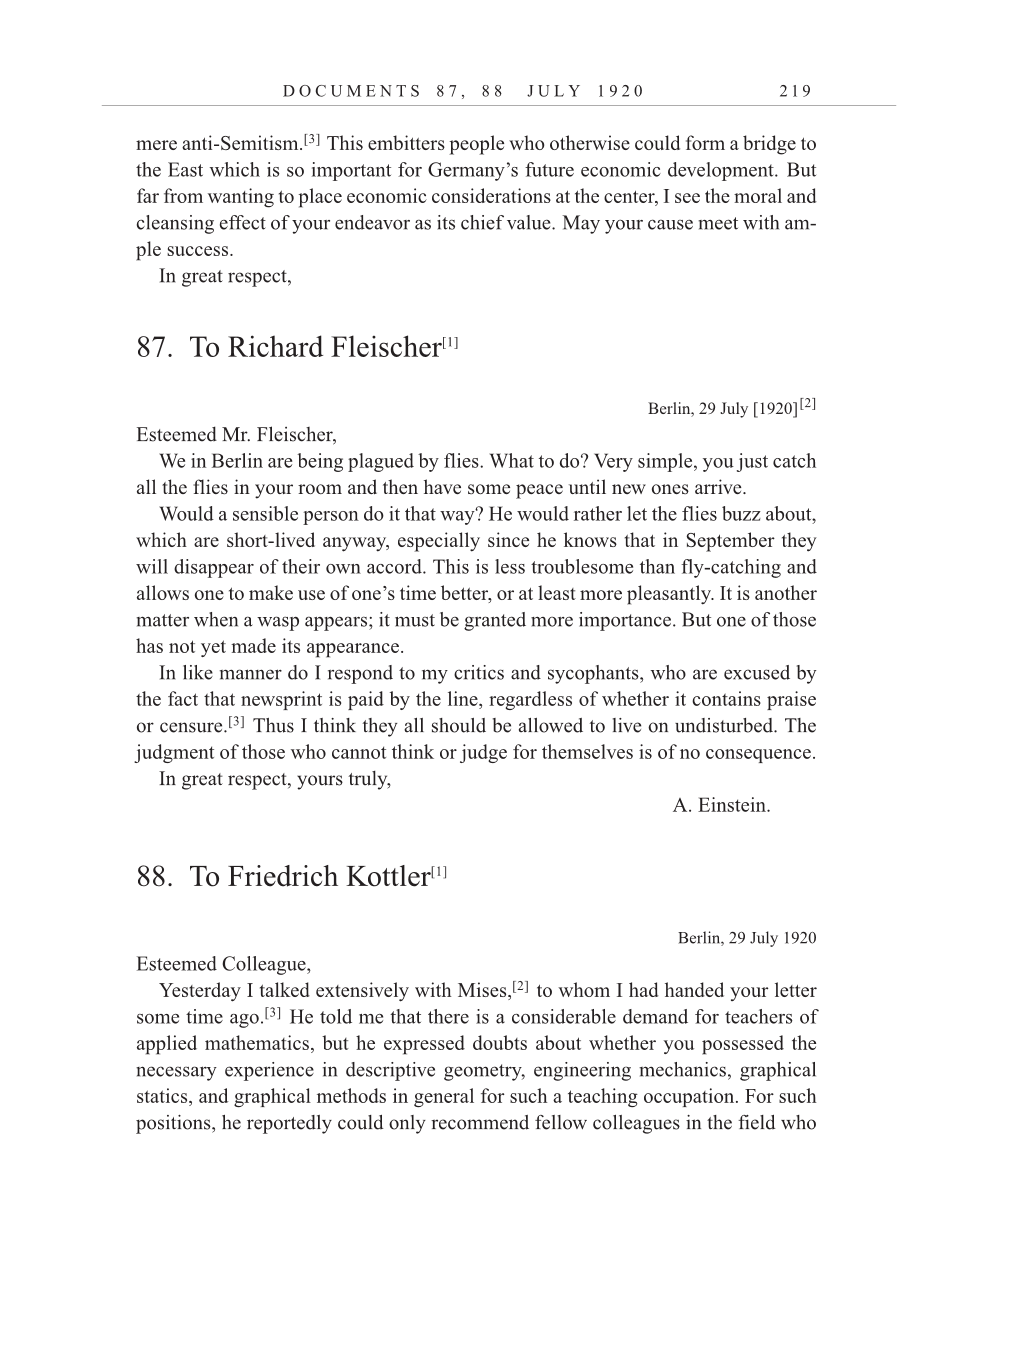 Volume 10: The Berlin Years: Correspondence, May-December 1920, and Supplementary Correspondence, 1909-1920 (English translation supplement) page 219